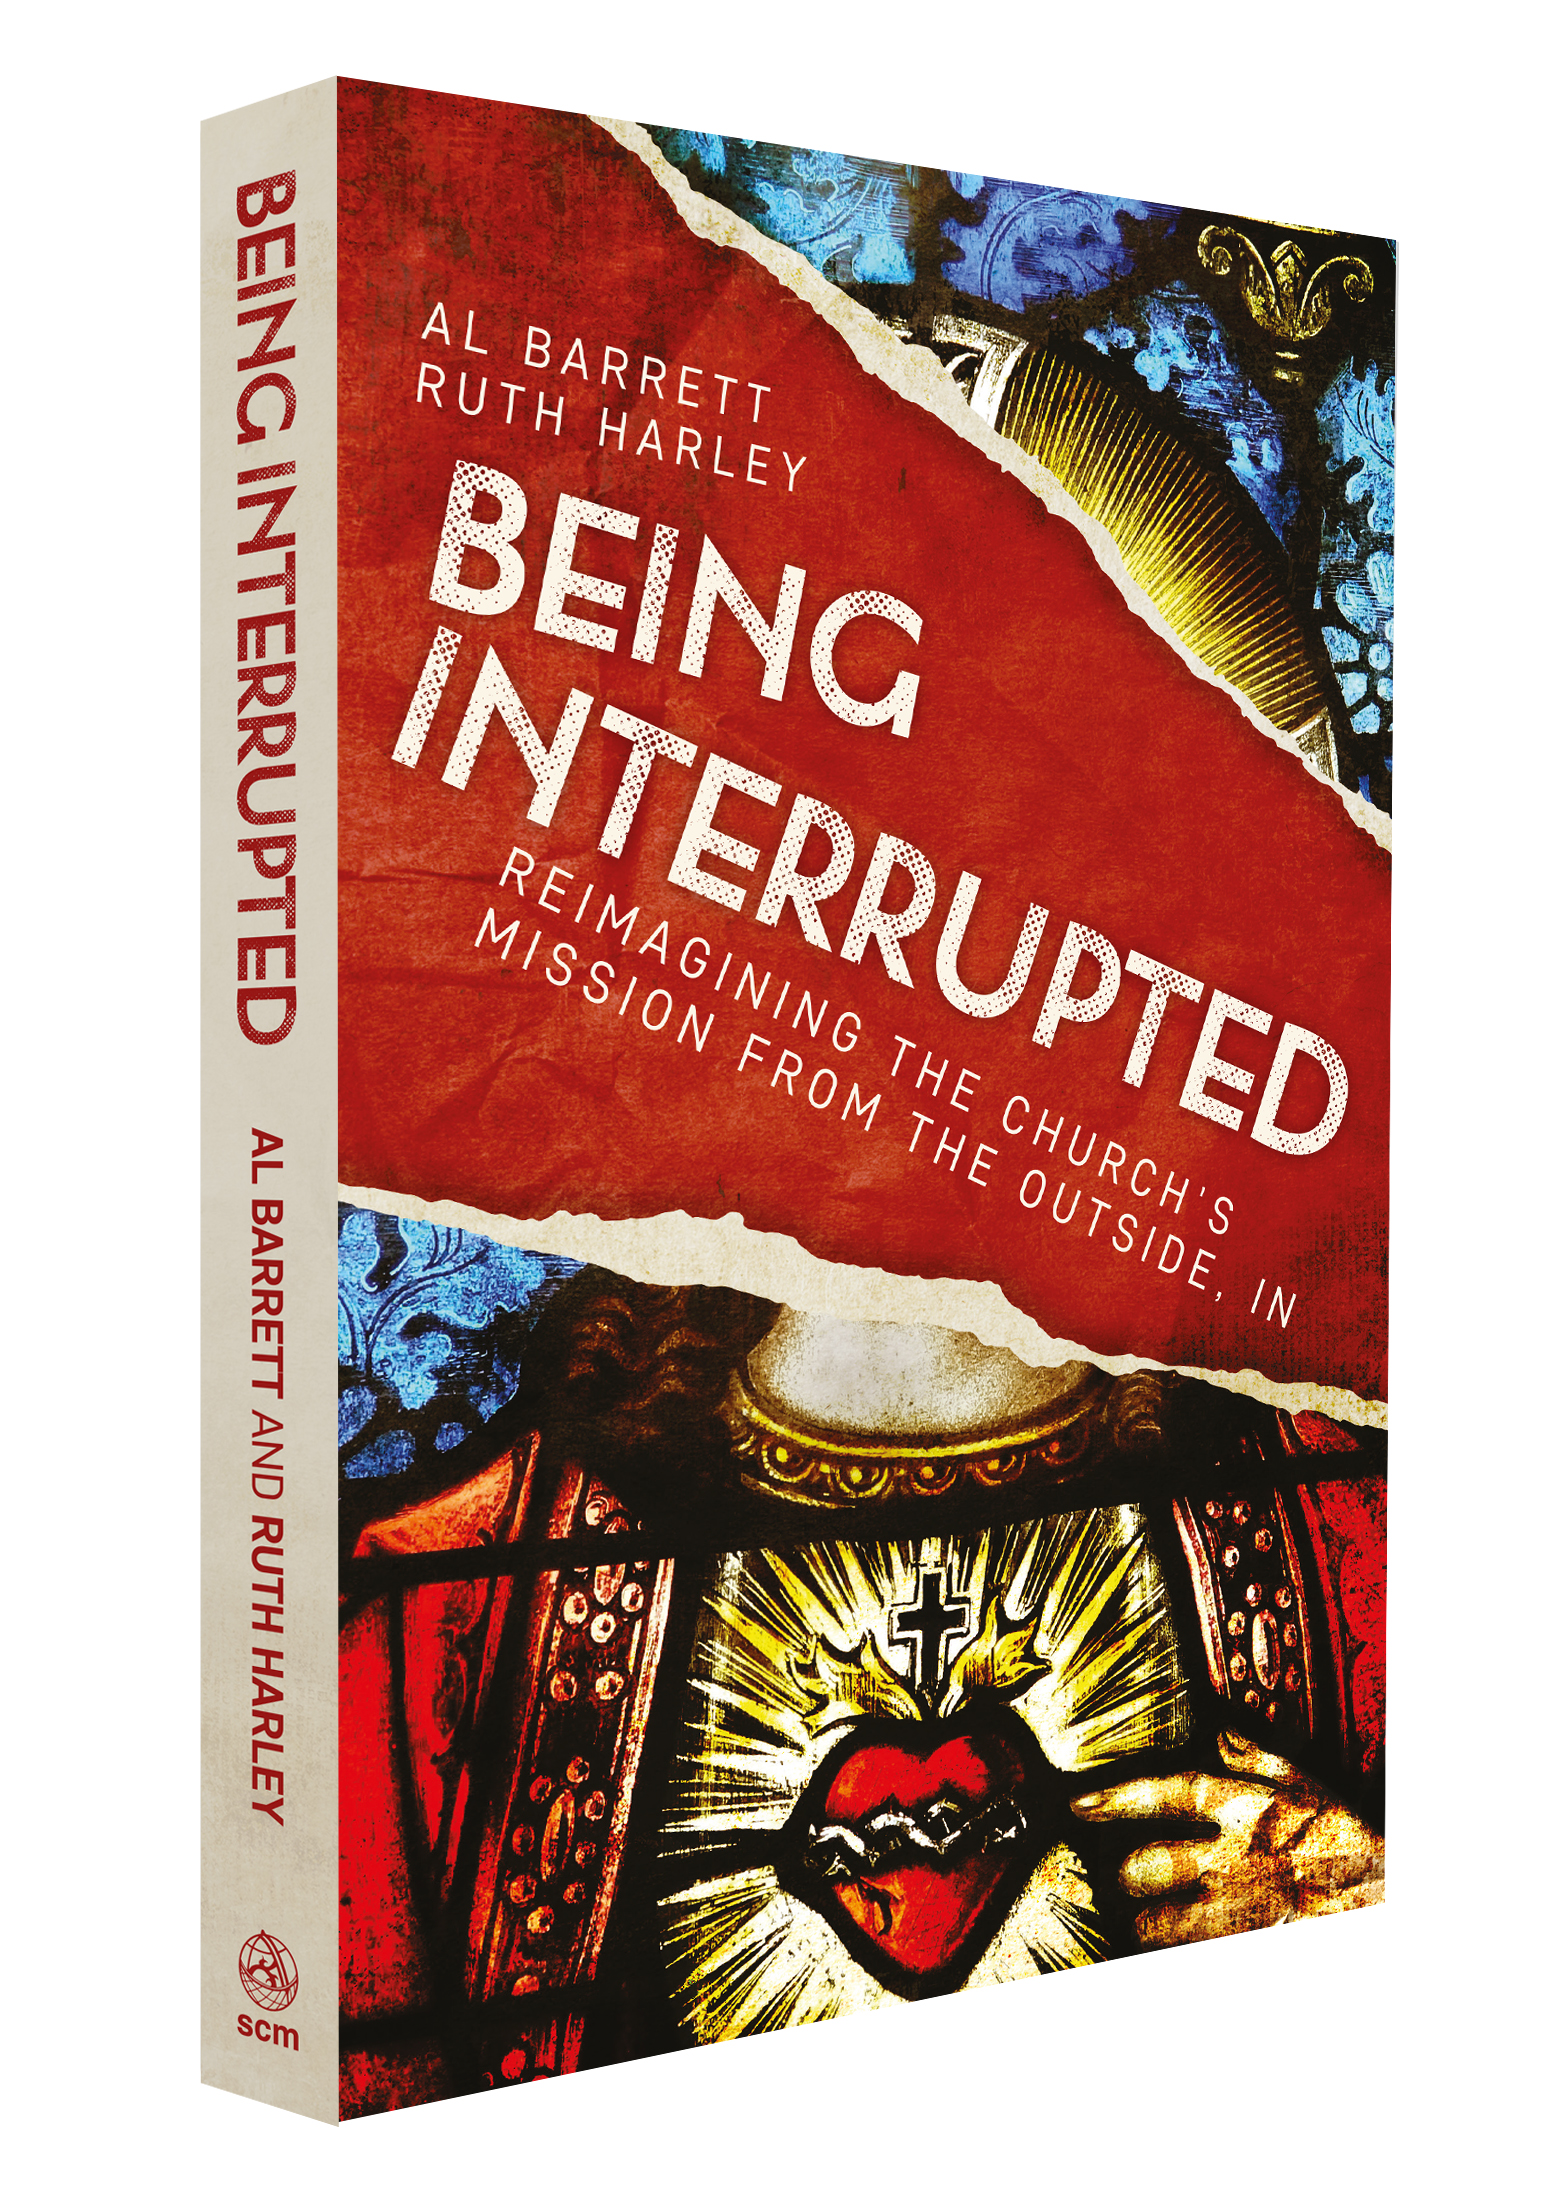 Being Interrupted cover design